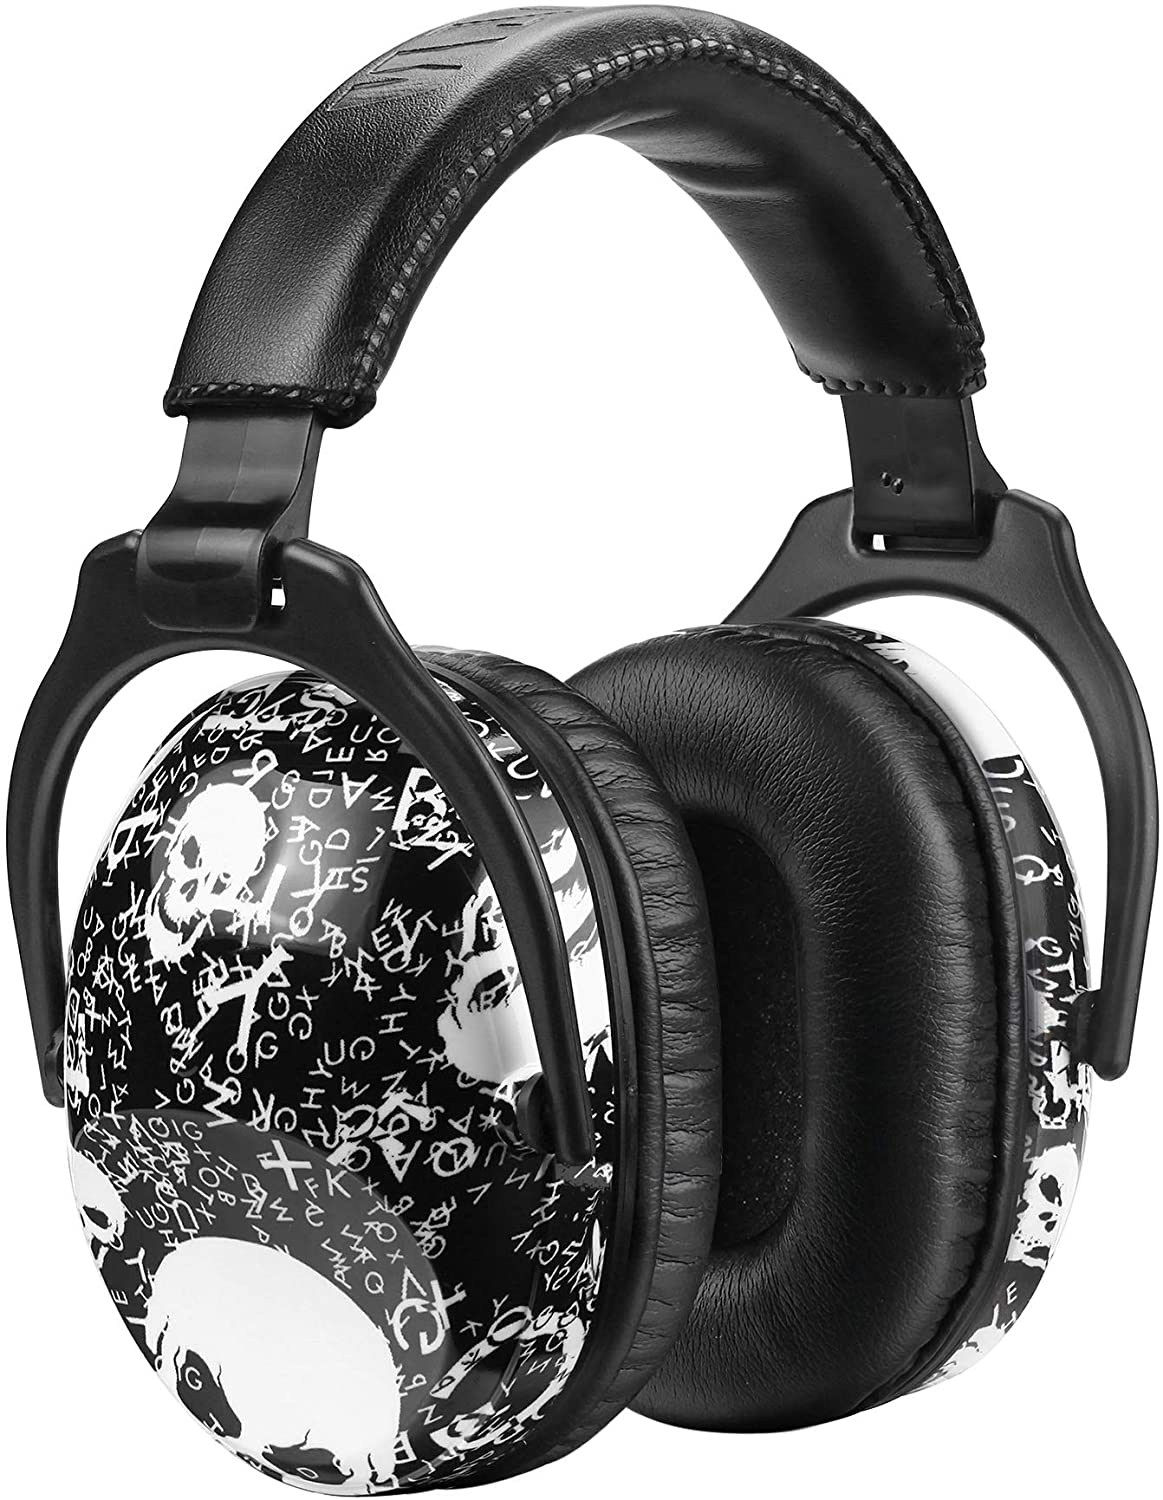 A pair off noise reducing earmuffs that have a black background, scribbly text, and white skulls.